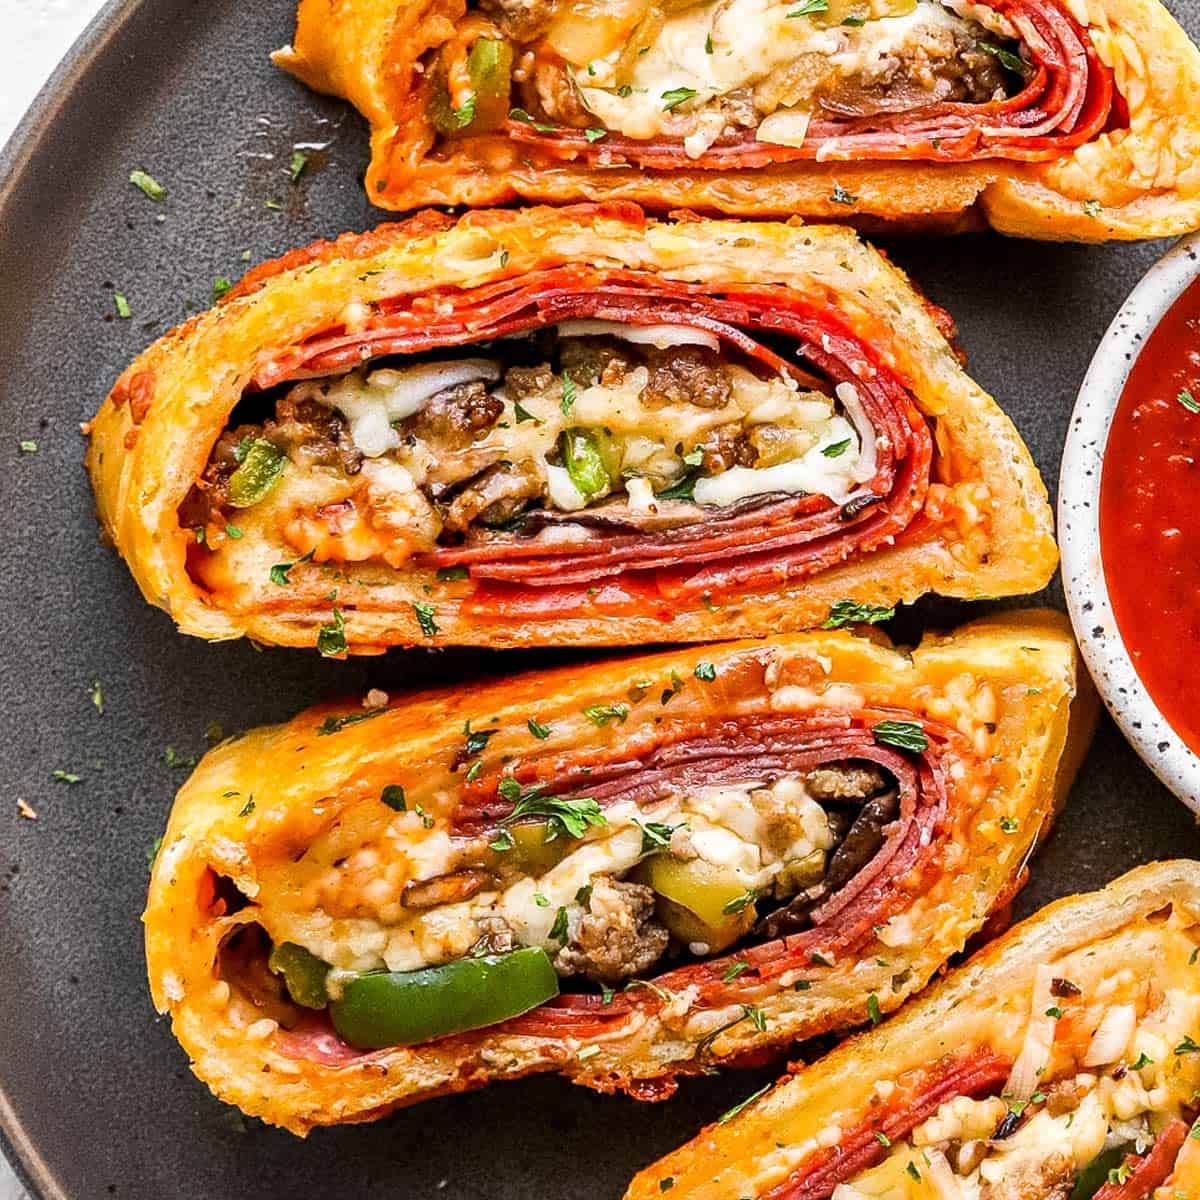 https://www.thechunkychef.com/wp-content/uploads/2021/08/Ultimate-Deluxe-Stromboli-recipe-card.jpg